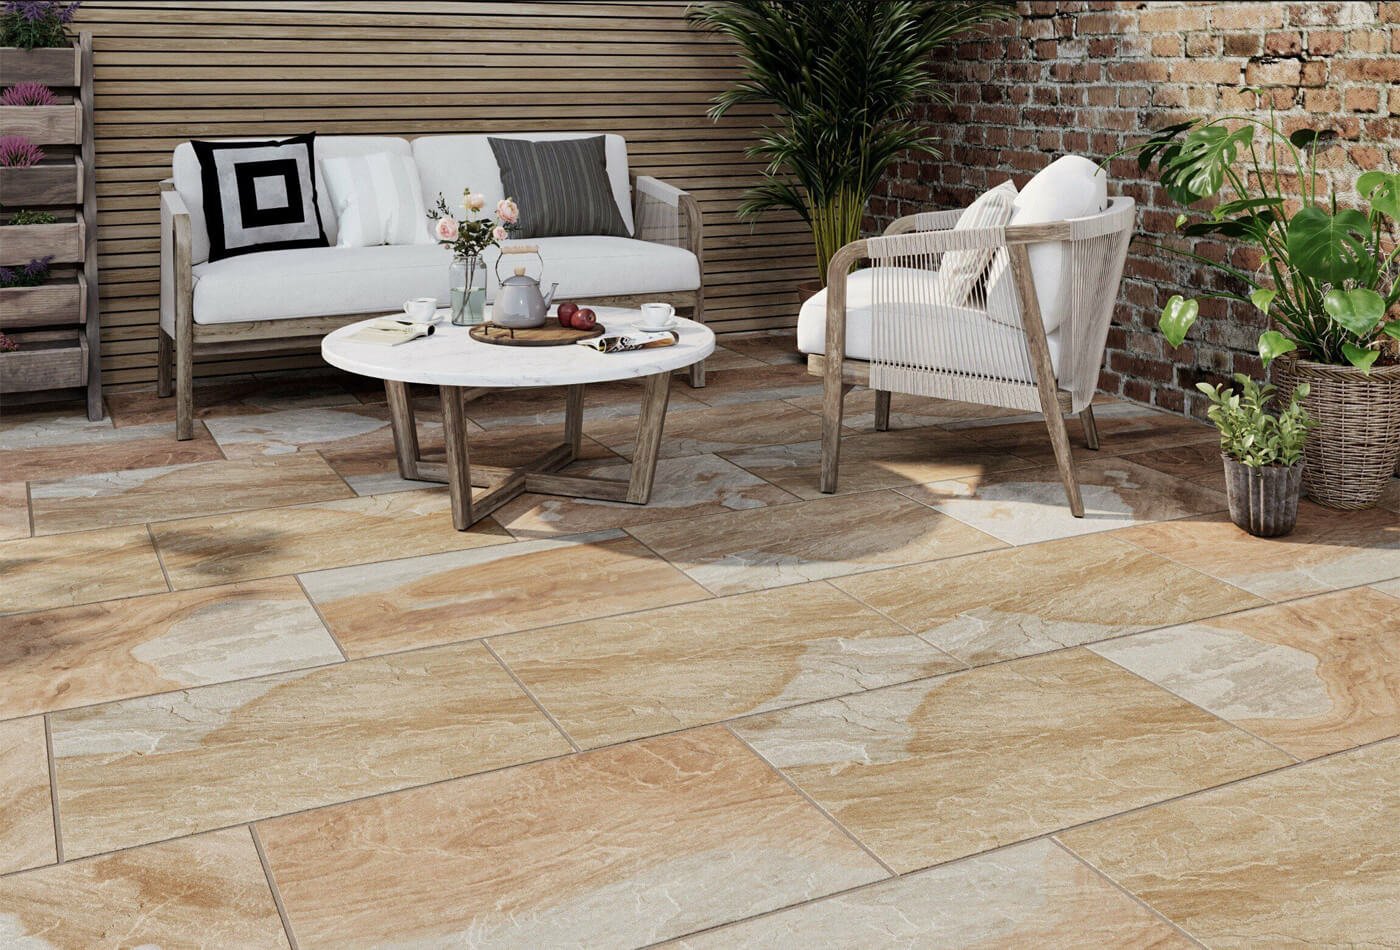 How To Extend A Patio Slab